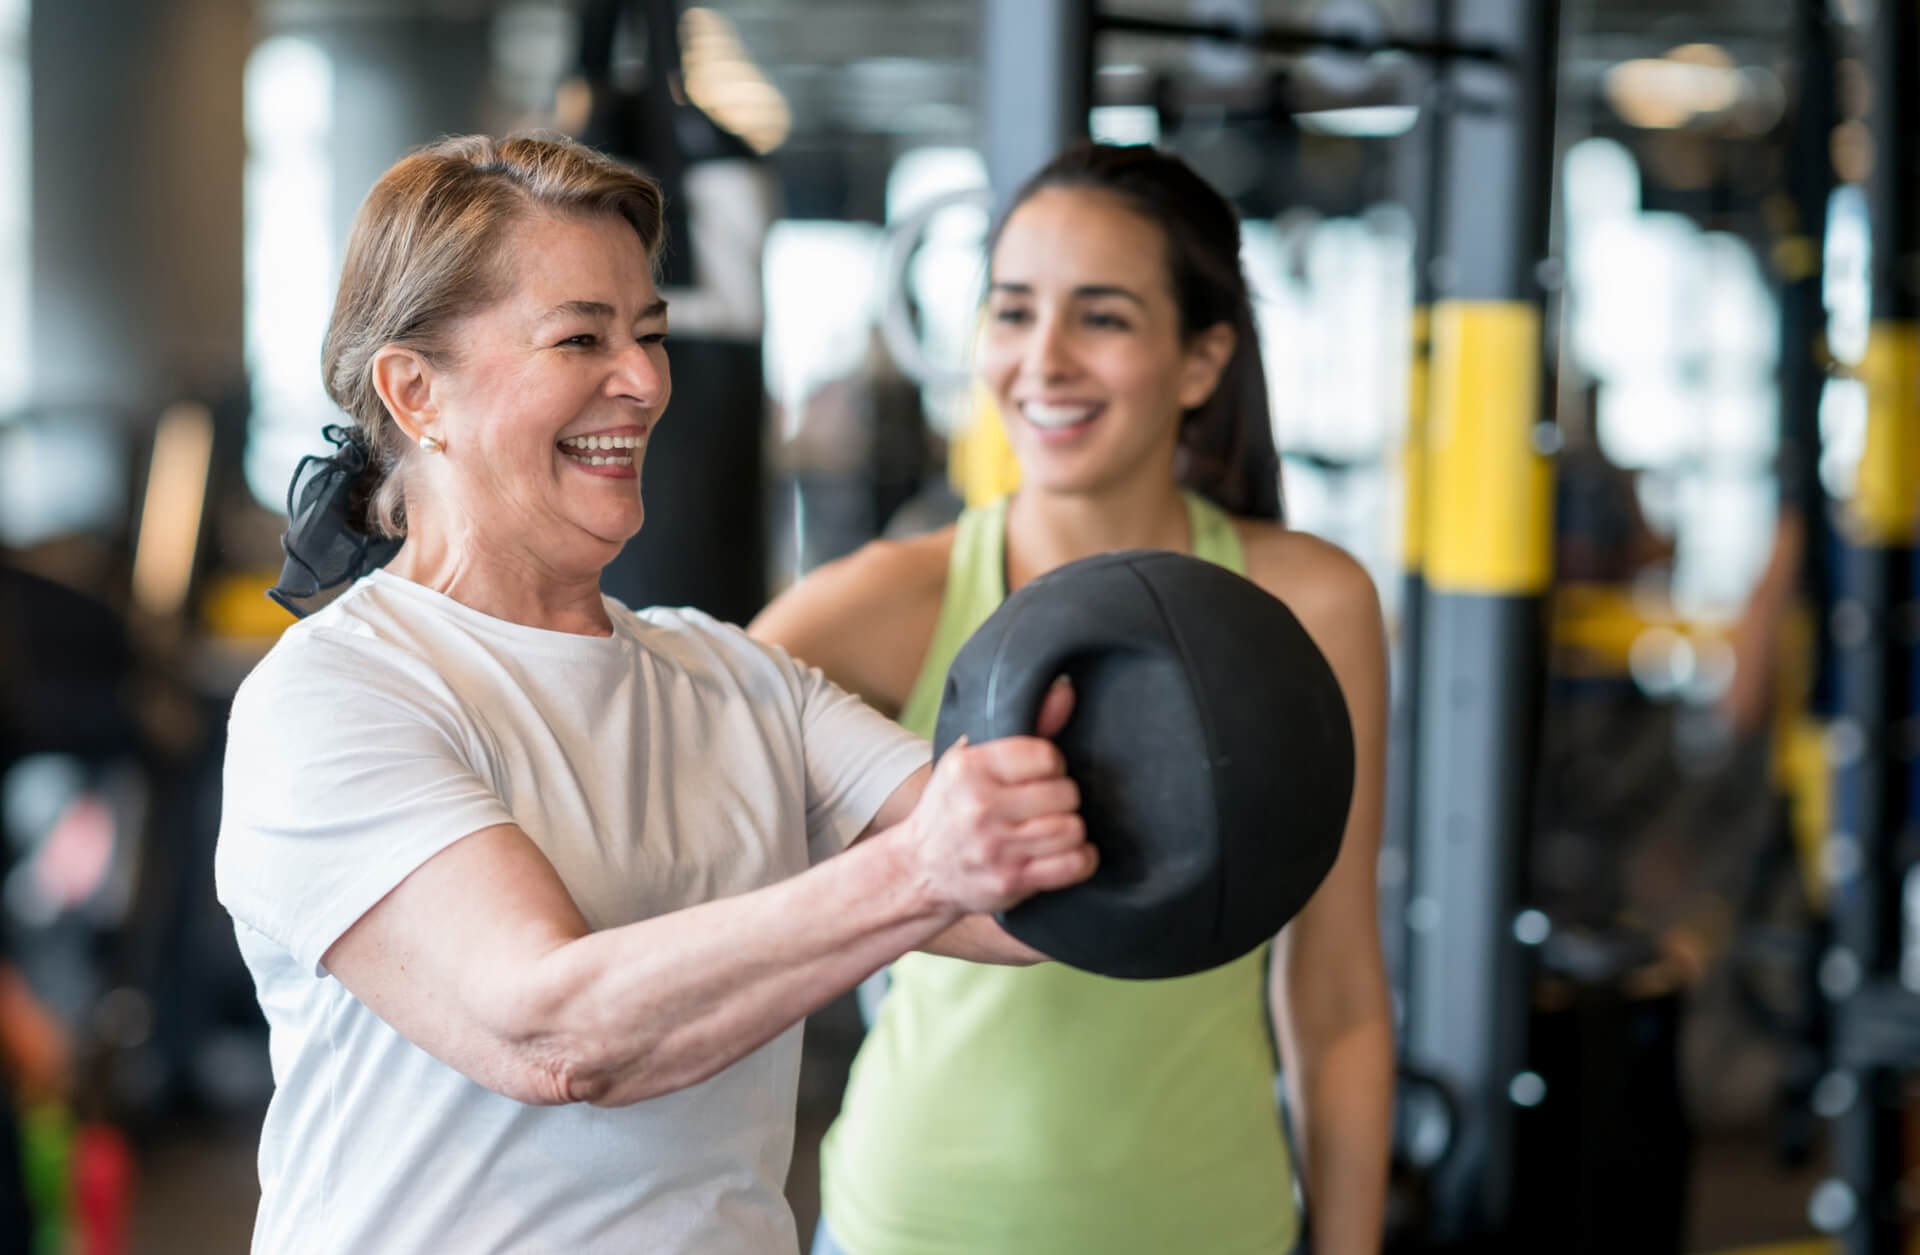 Older woman happily lifting kettlebell with a personal trainer providing encouragement